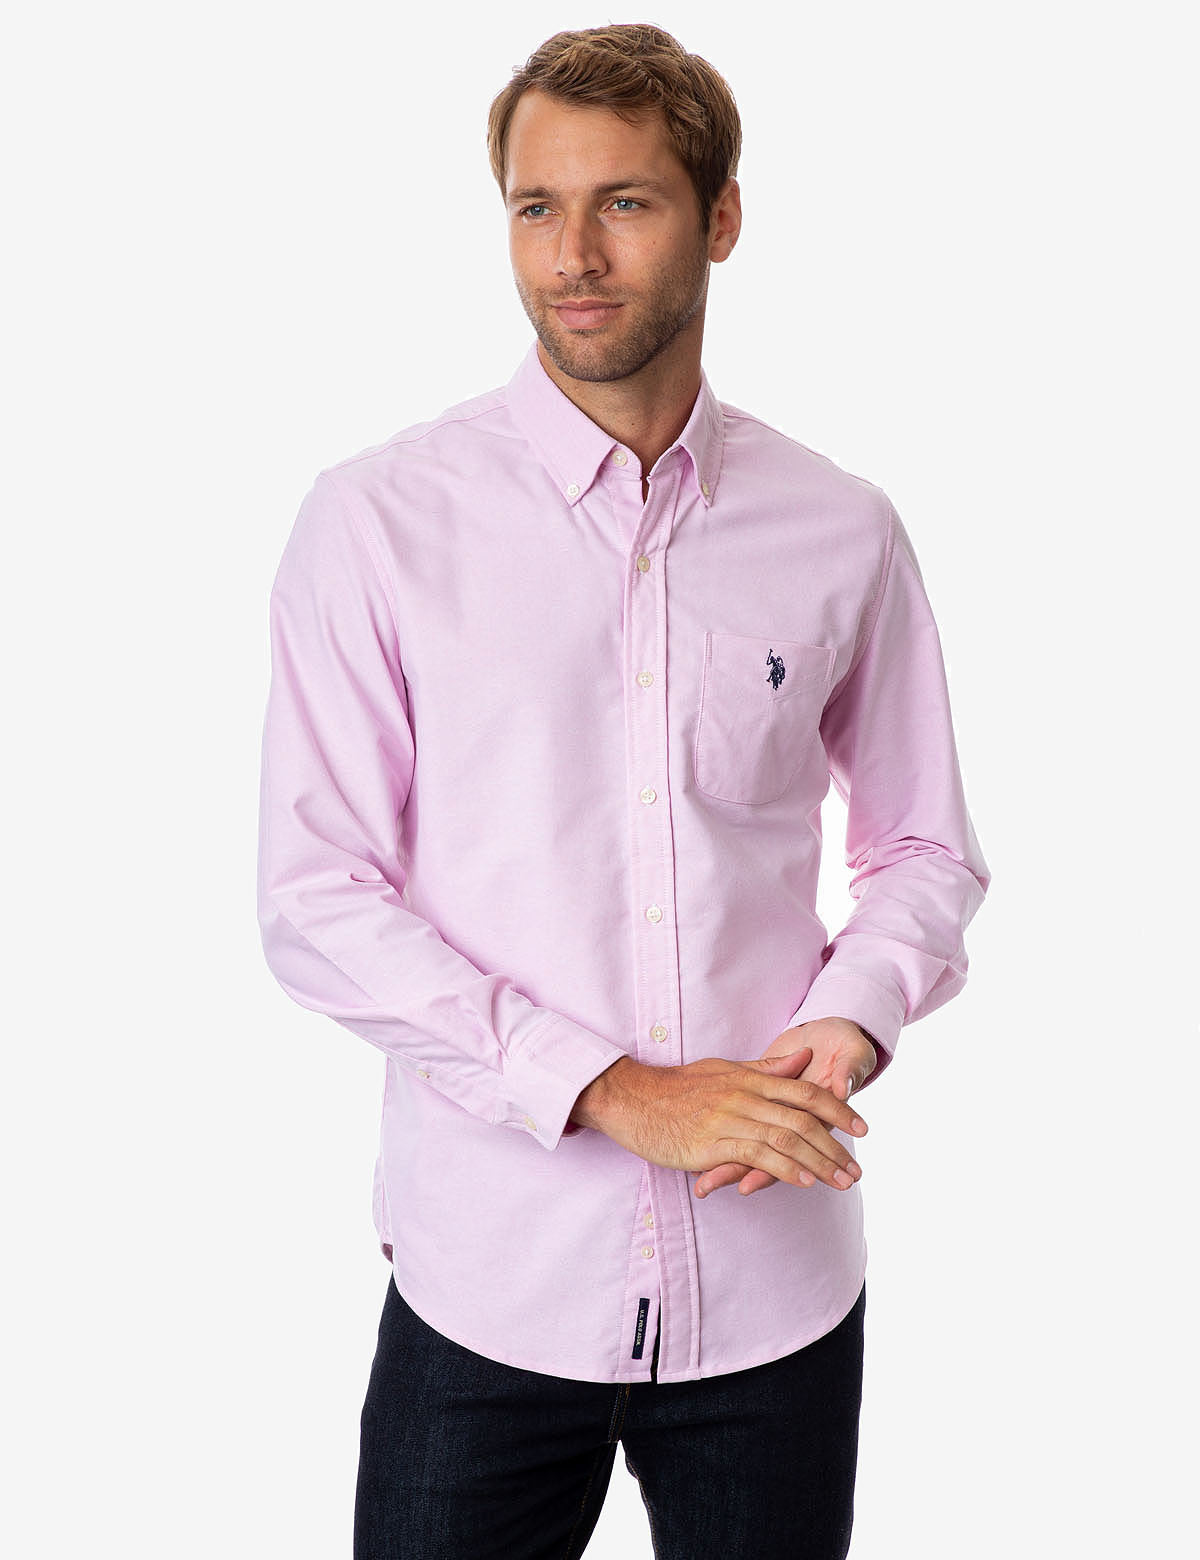 best polo shirts for men india